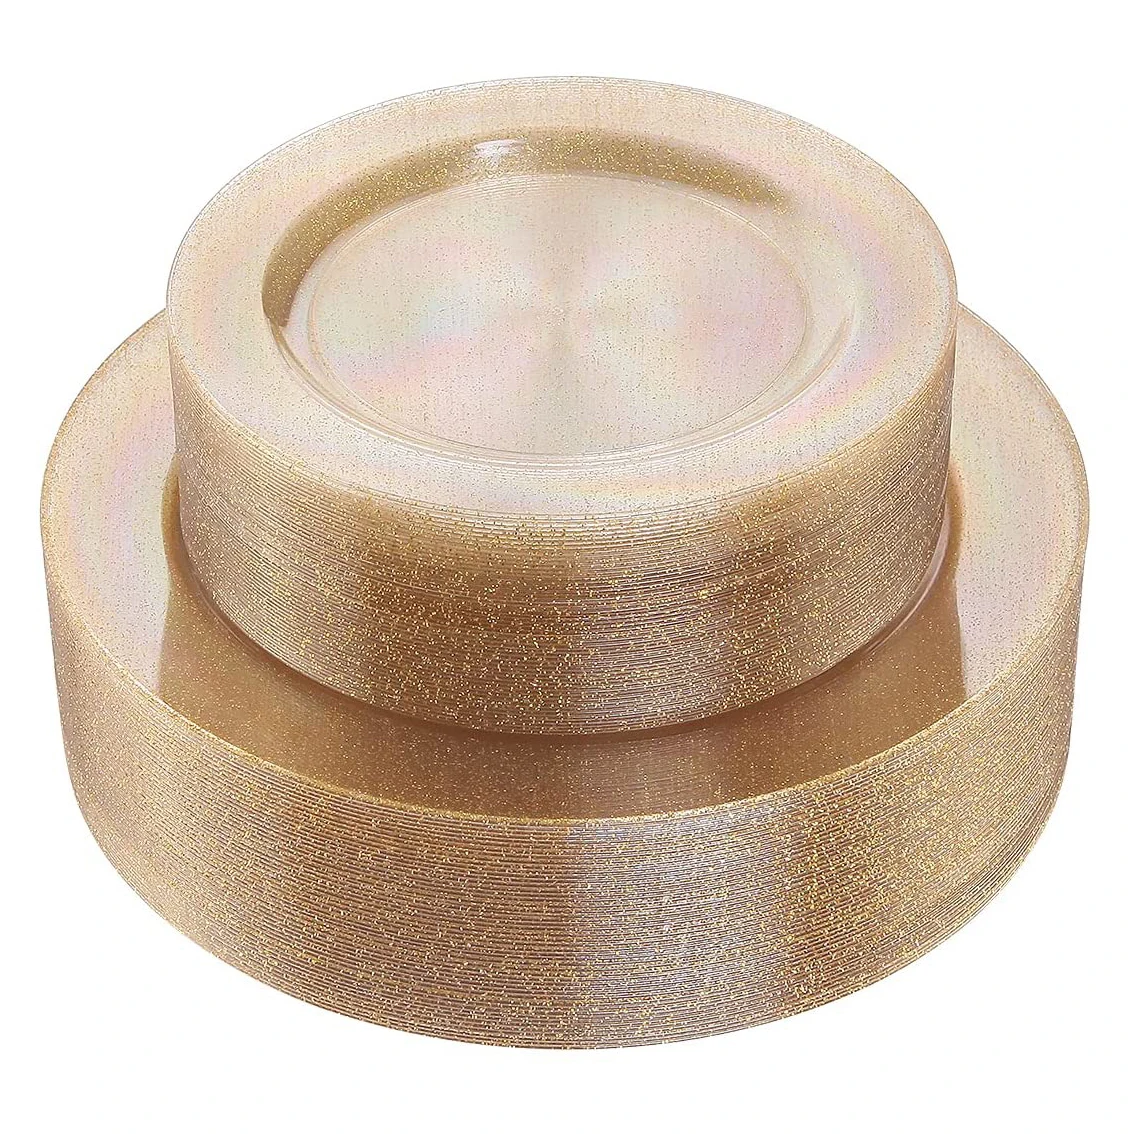 40 Gold Plastic Plates-Disposable Gold Glitter Plates,Include 20-10.25